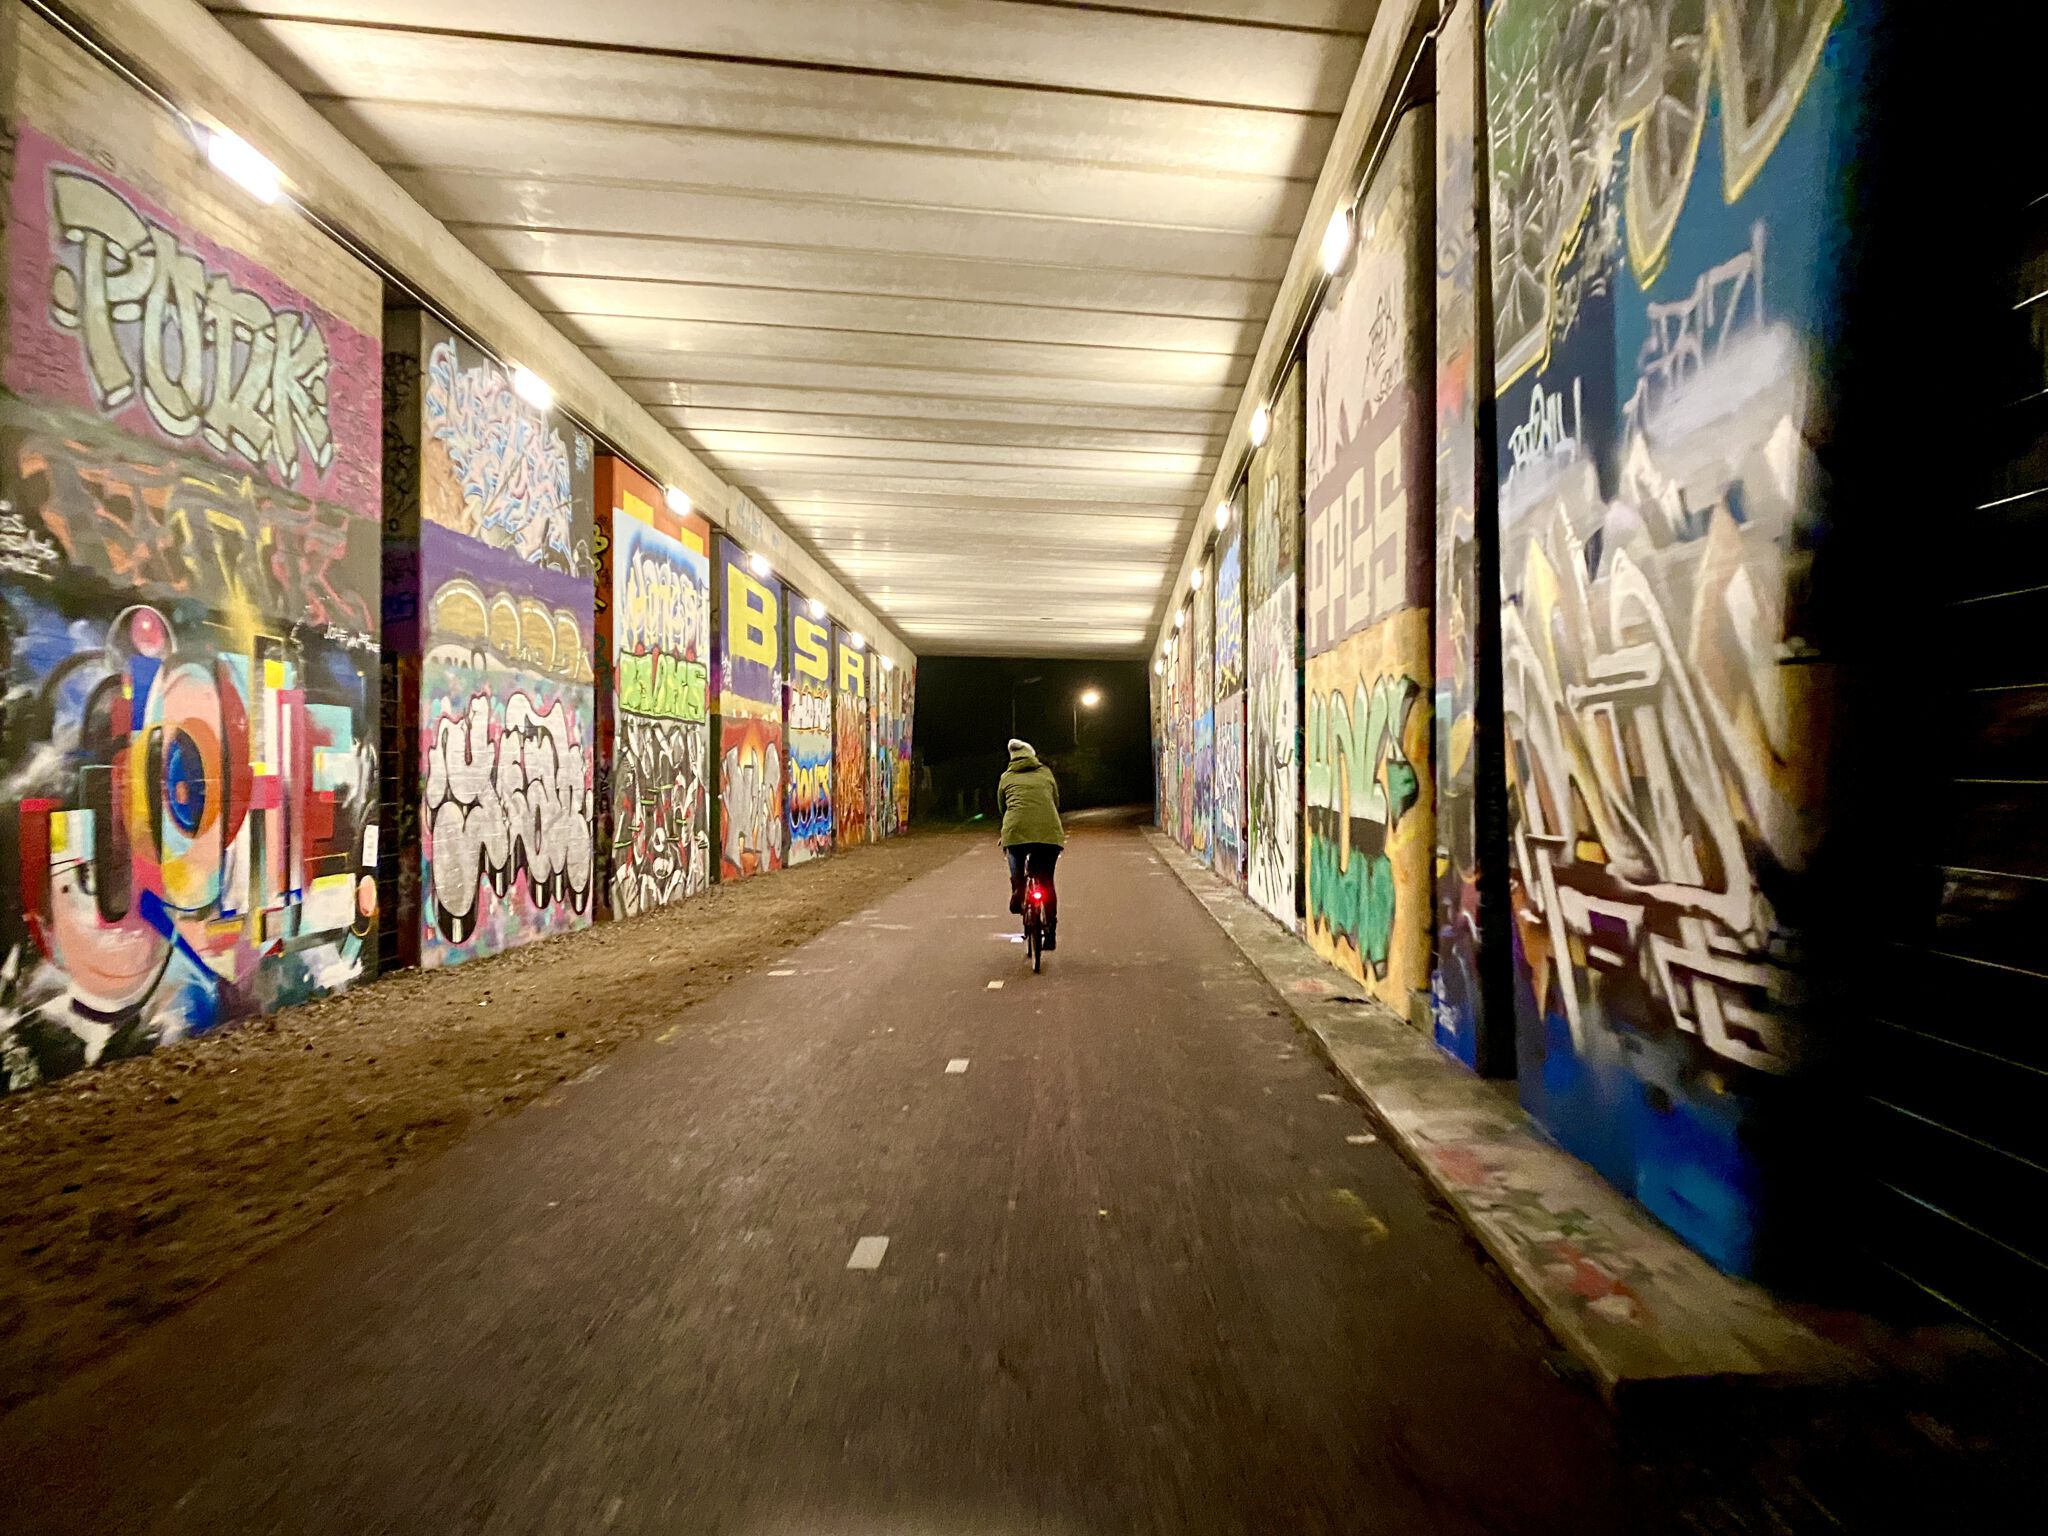 &mdash;Hotspot with cool art in a tunnel